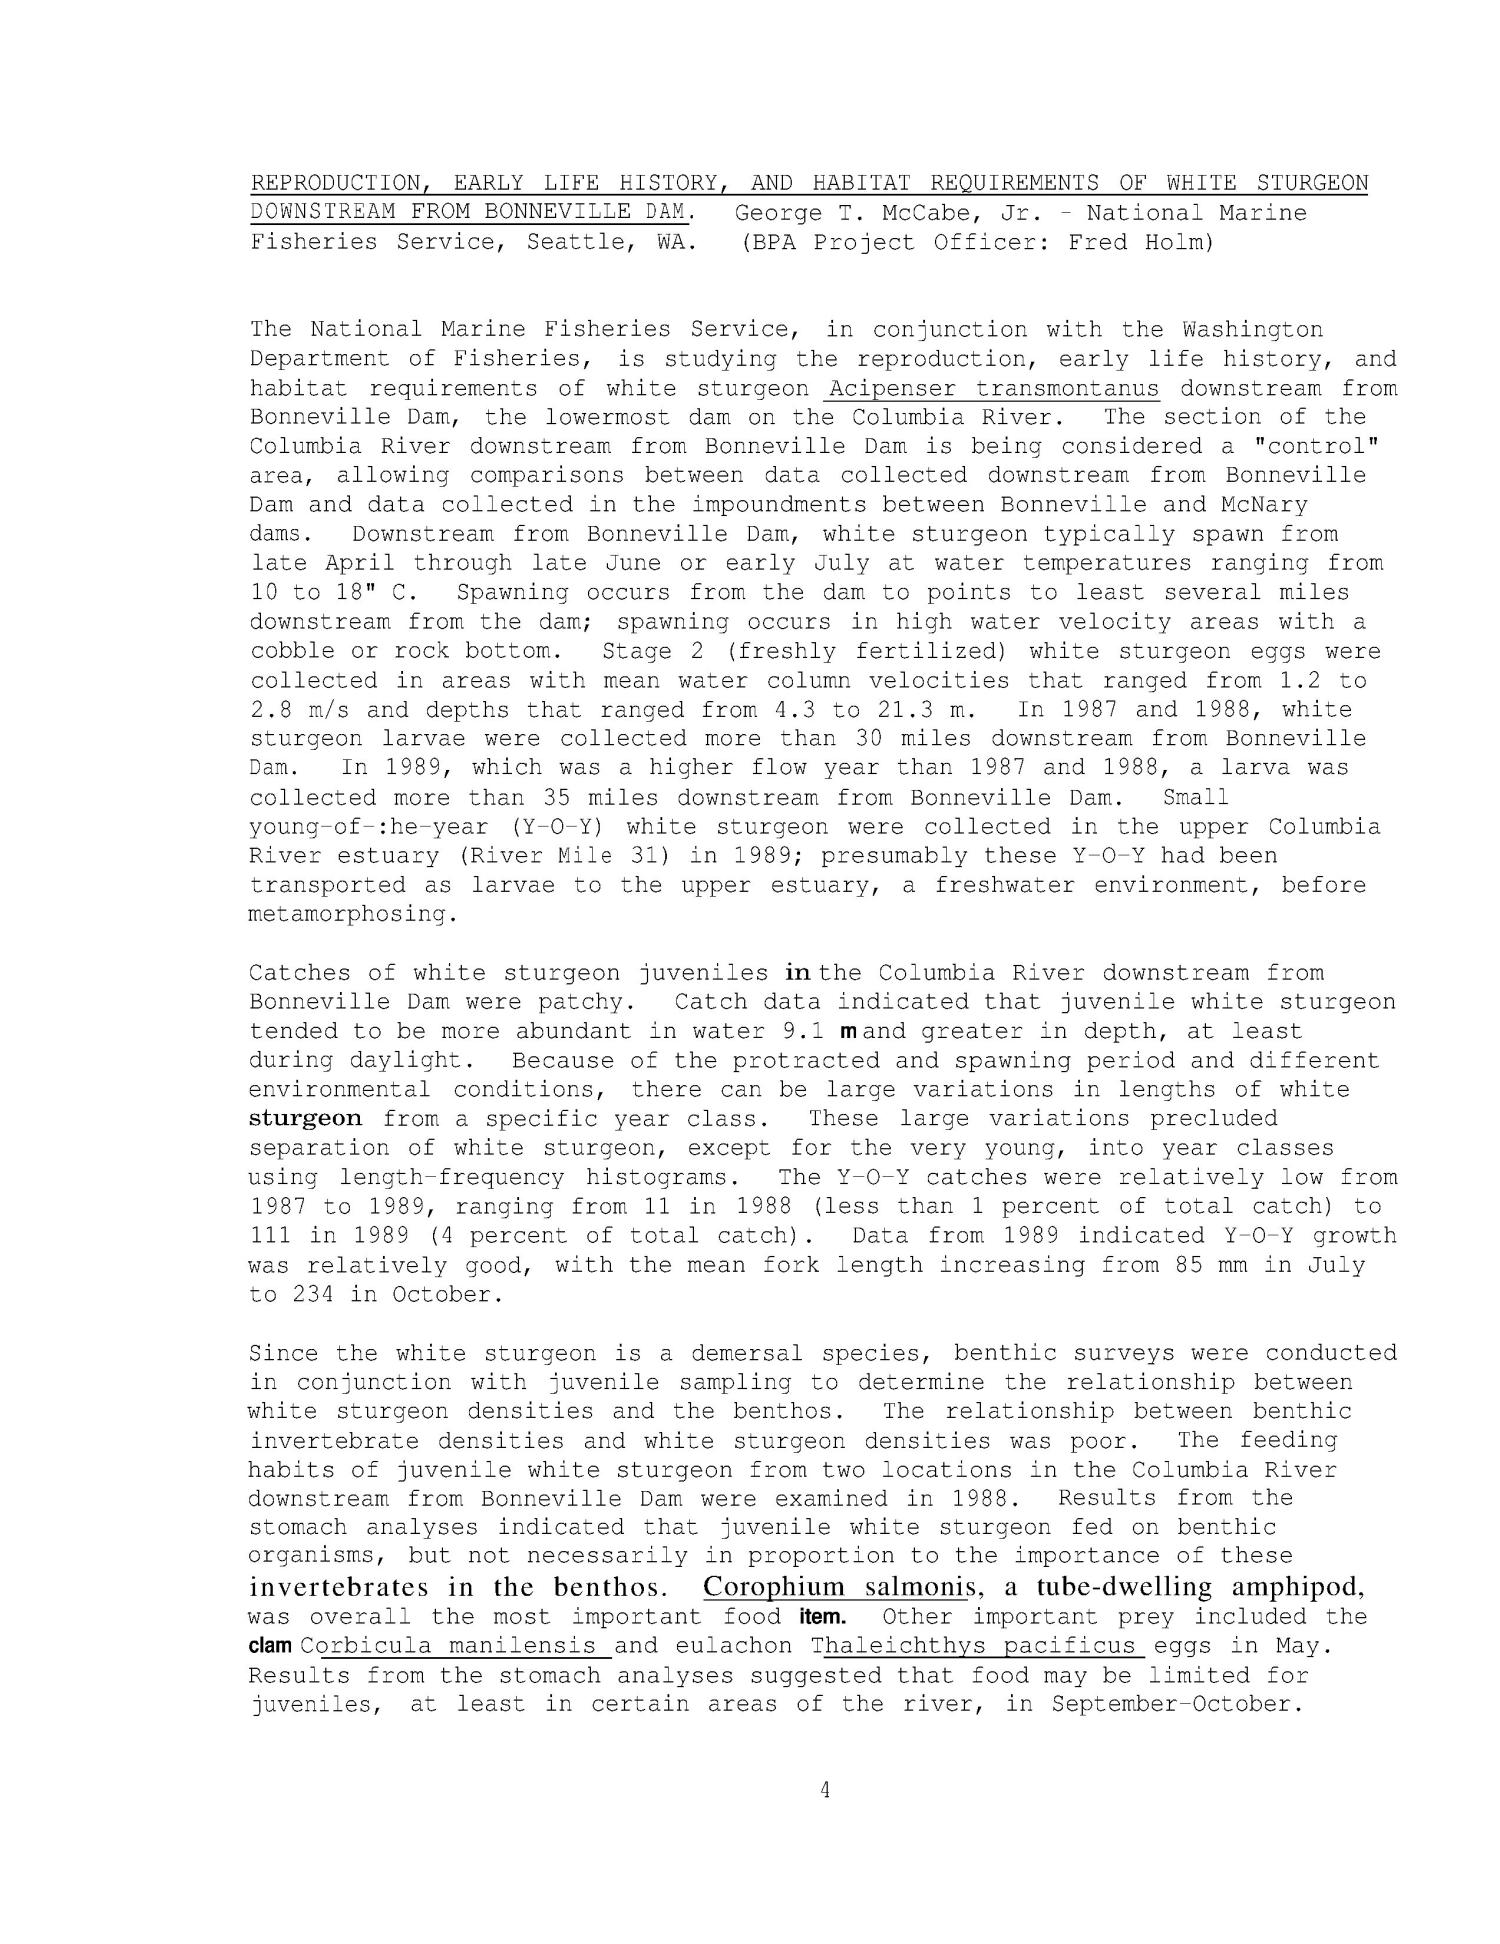 Review of BPA Funded Sturgeon, Resident Fish and Wildlife Projects, 1989/1990.
                                                
                                                    [Sequence #]: 4 of 29
                                                